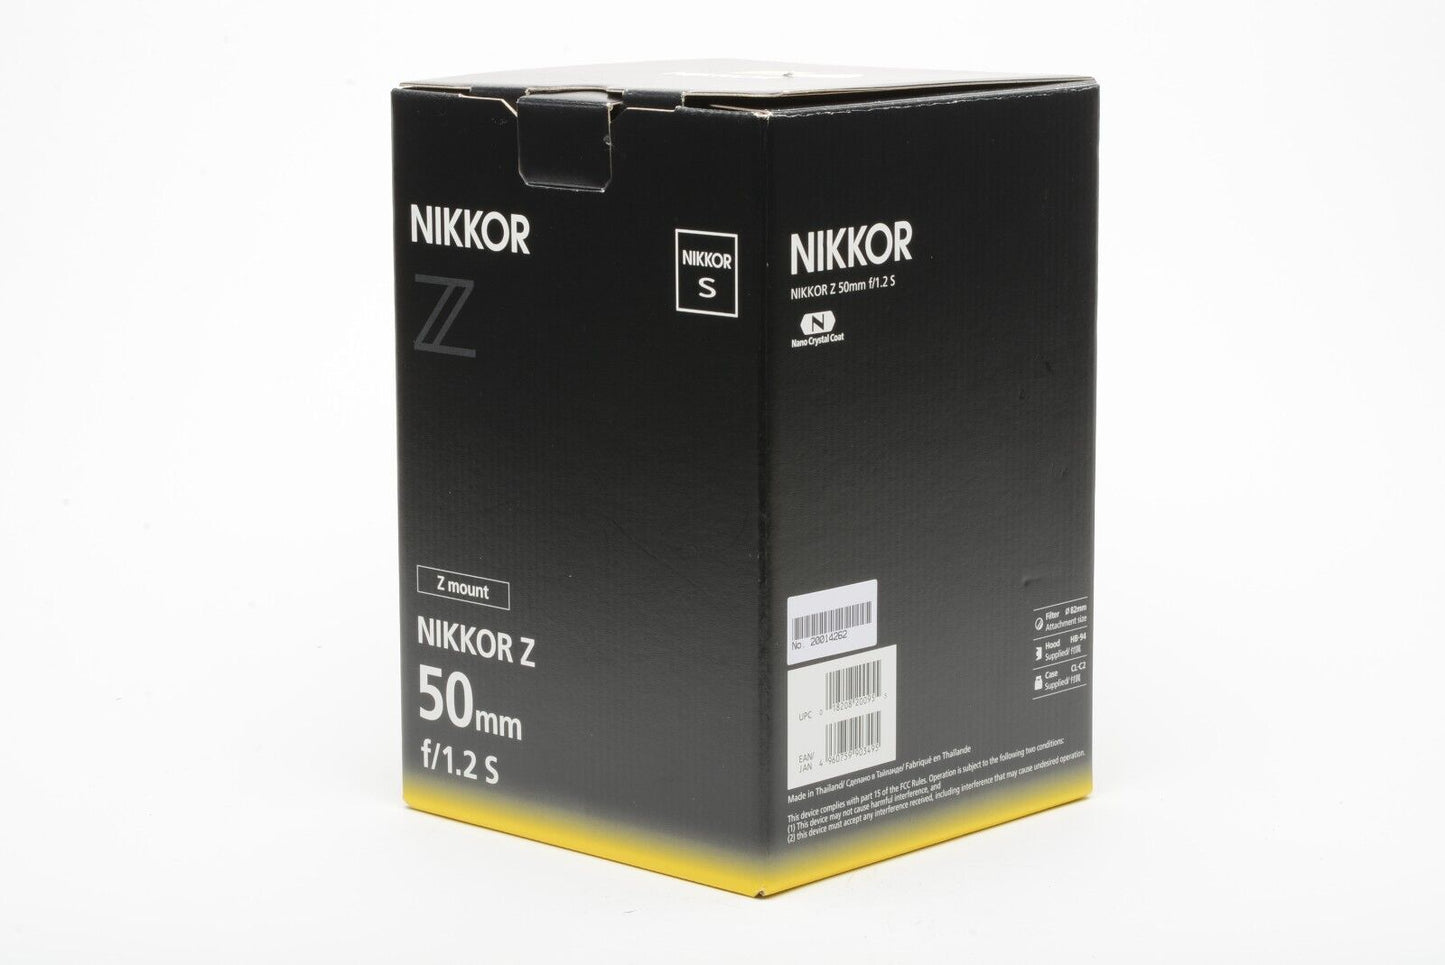 MINT NIKON NIKKOR Z 50mm f1.2 S US ALENS, BOXED, NEVER USED OR MOUNTED